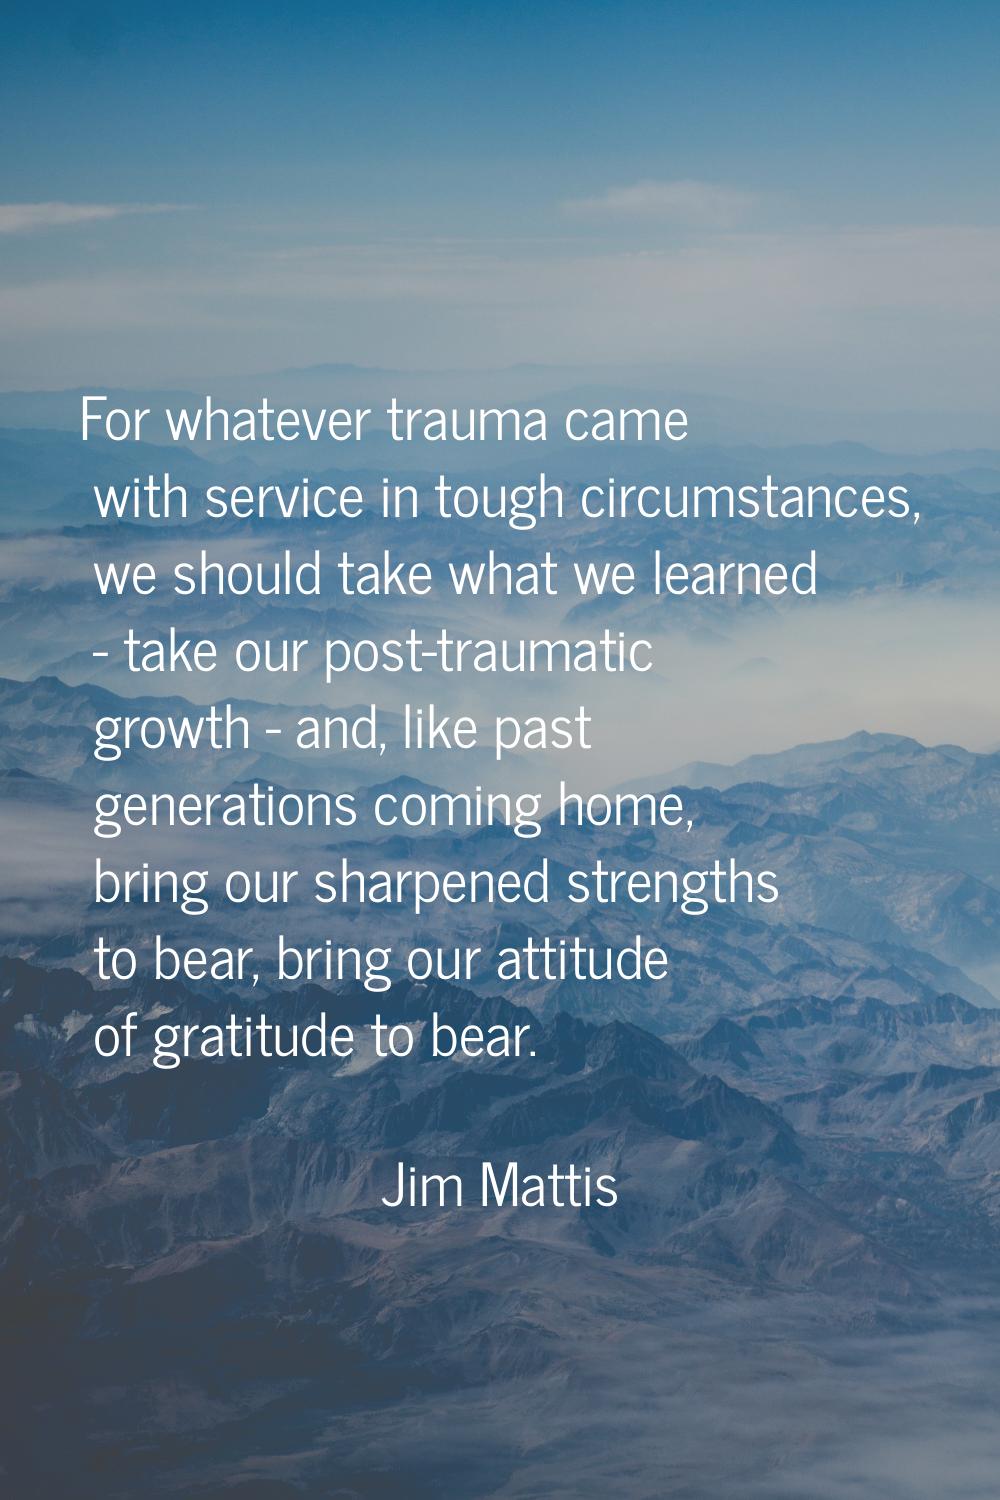 For whatever trauma came with service in tough circumstances, we should take what we learned - take